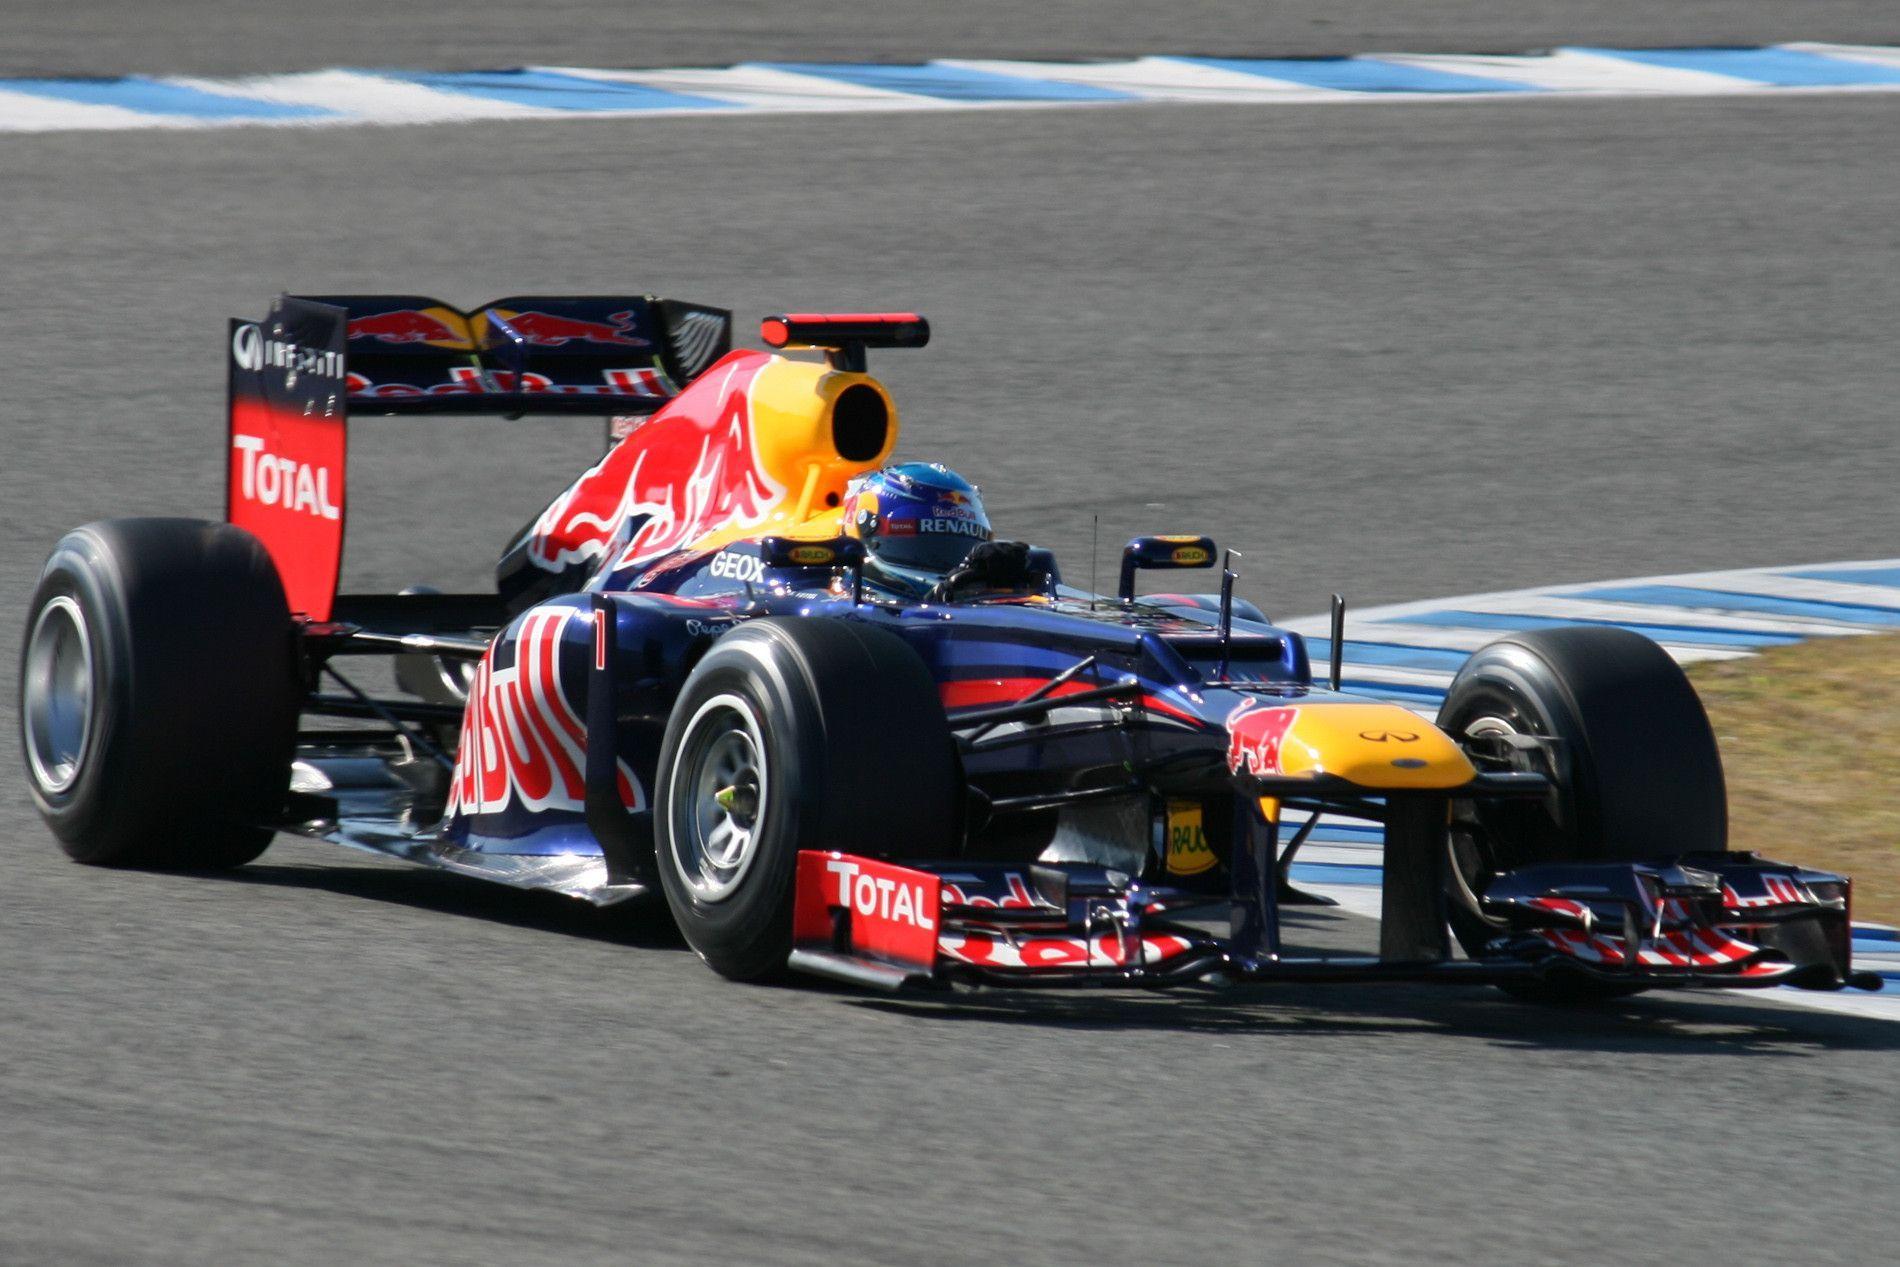 Red Bull RB8 2012 (Formula One, F1) wallpaper, photo, specs